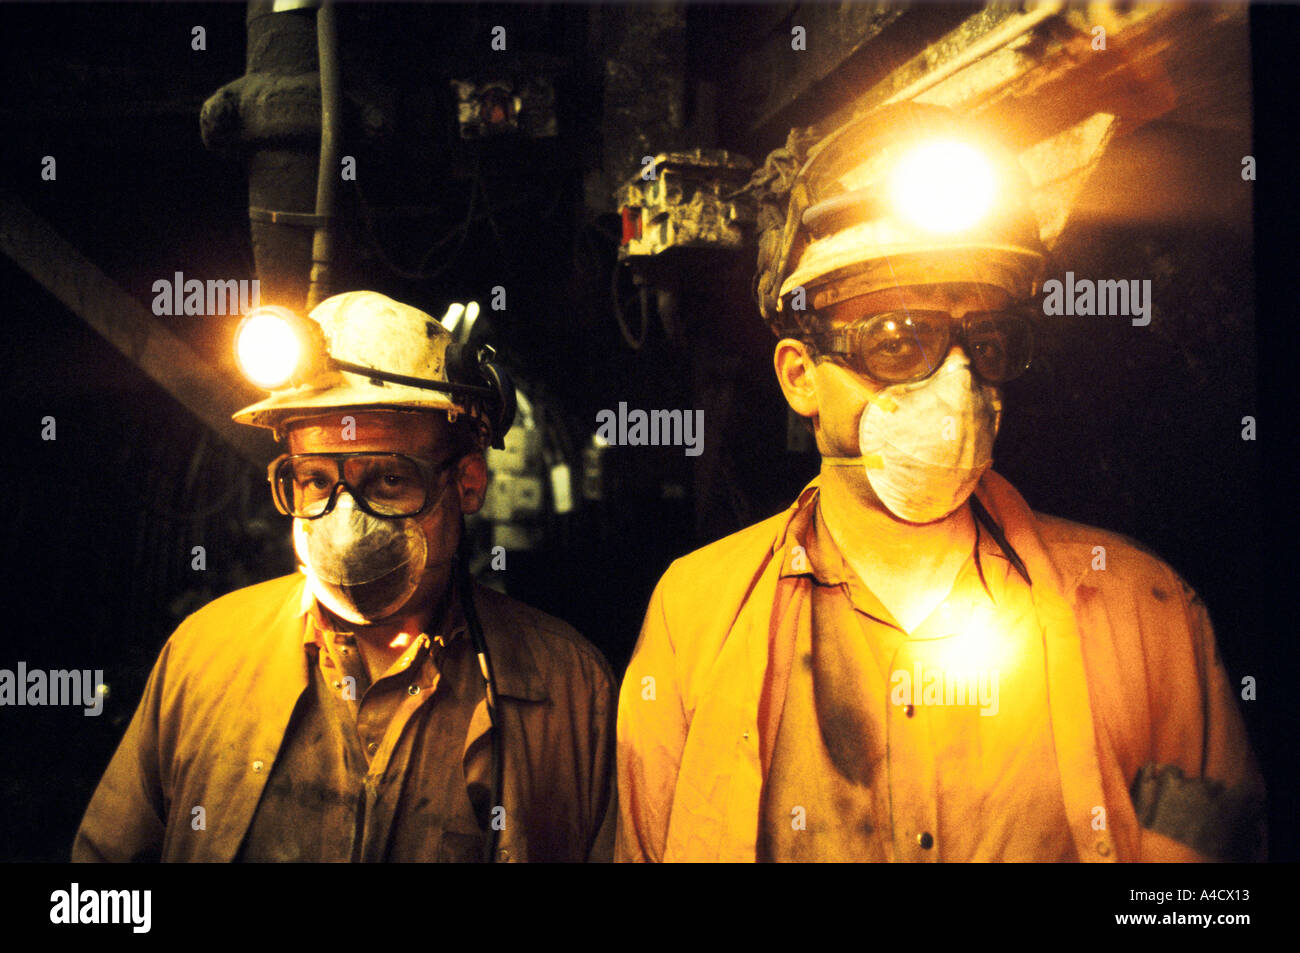 Shirebrook Colliery, Nottinghamshire, England: Miners working underground.  The mine faces closure. Stock Photo